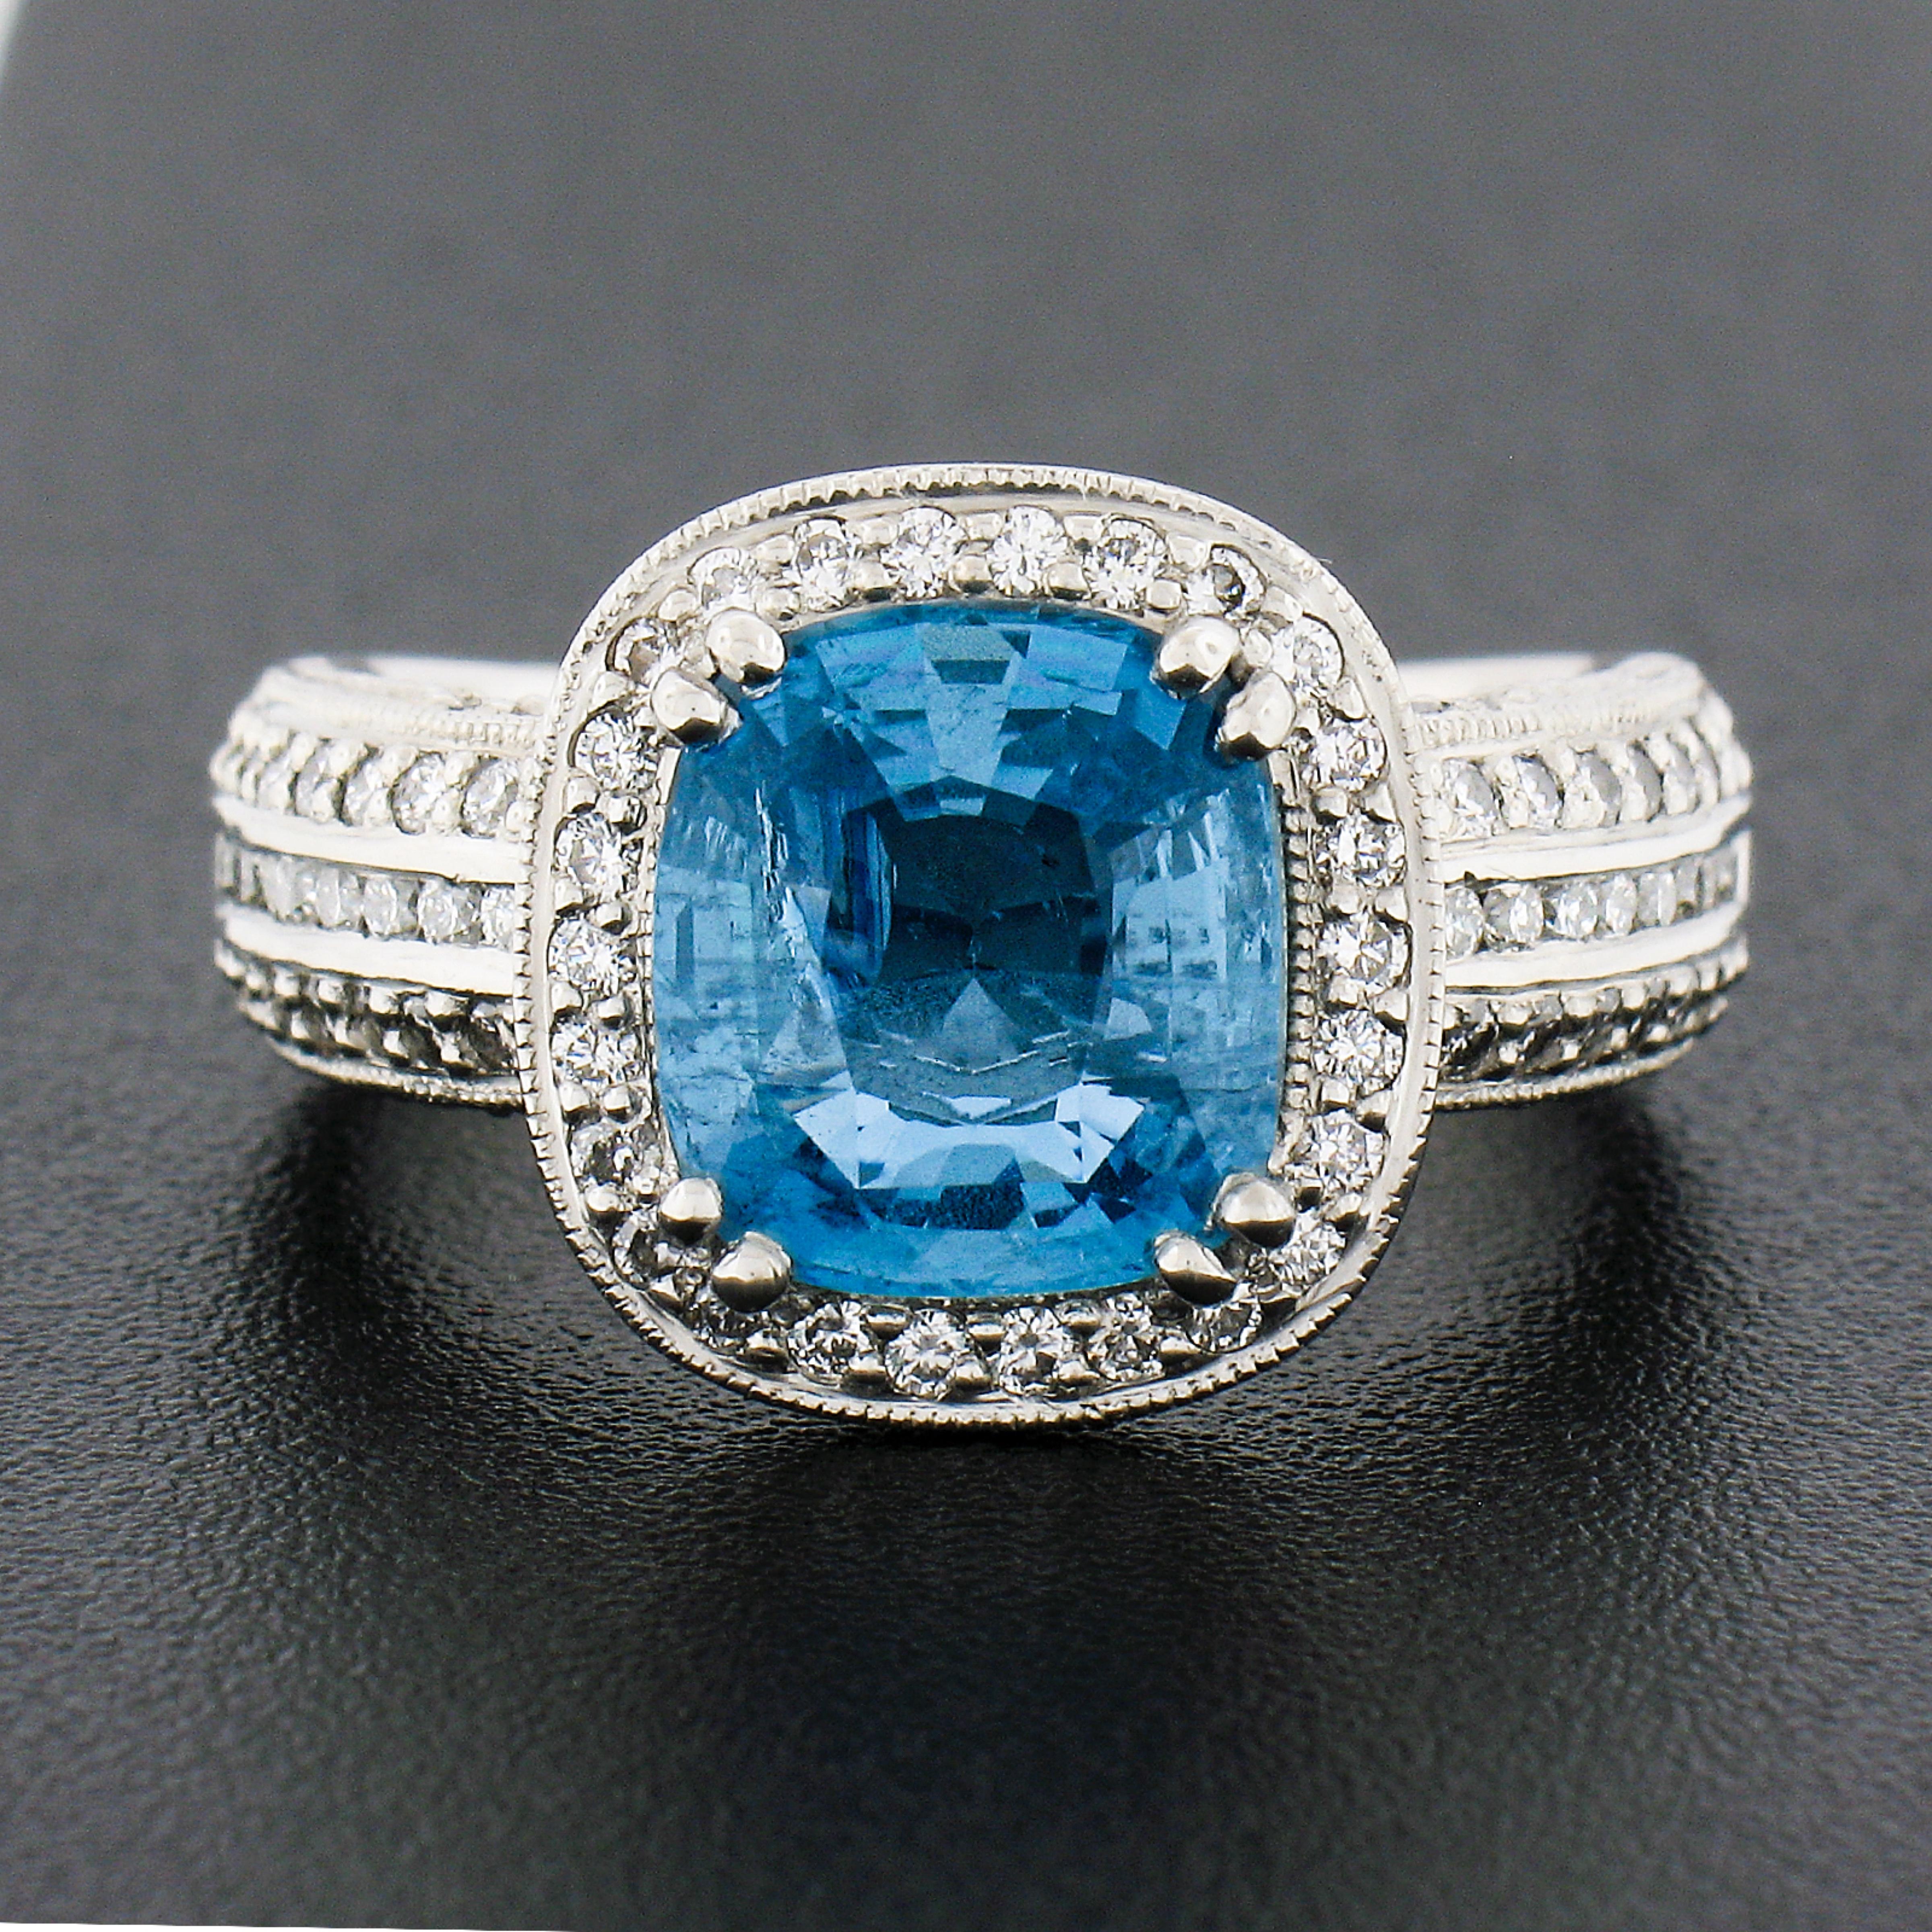 This magnificent and beautifully detailed ring is very well crafted in solid platinum and features a gorgeous aquamarine solitaire with fine quality diamond accents throughout. The elongated cushion cut aquamarine stone is 2.58 carats in weight and